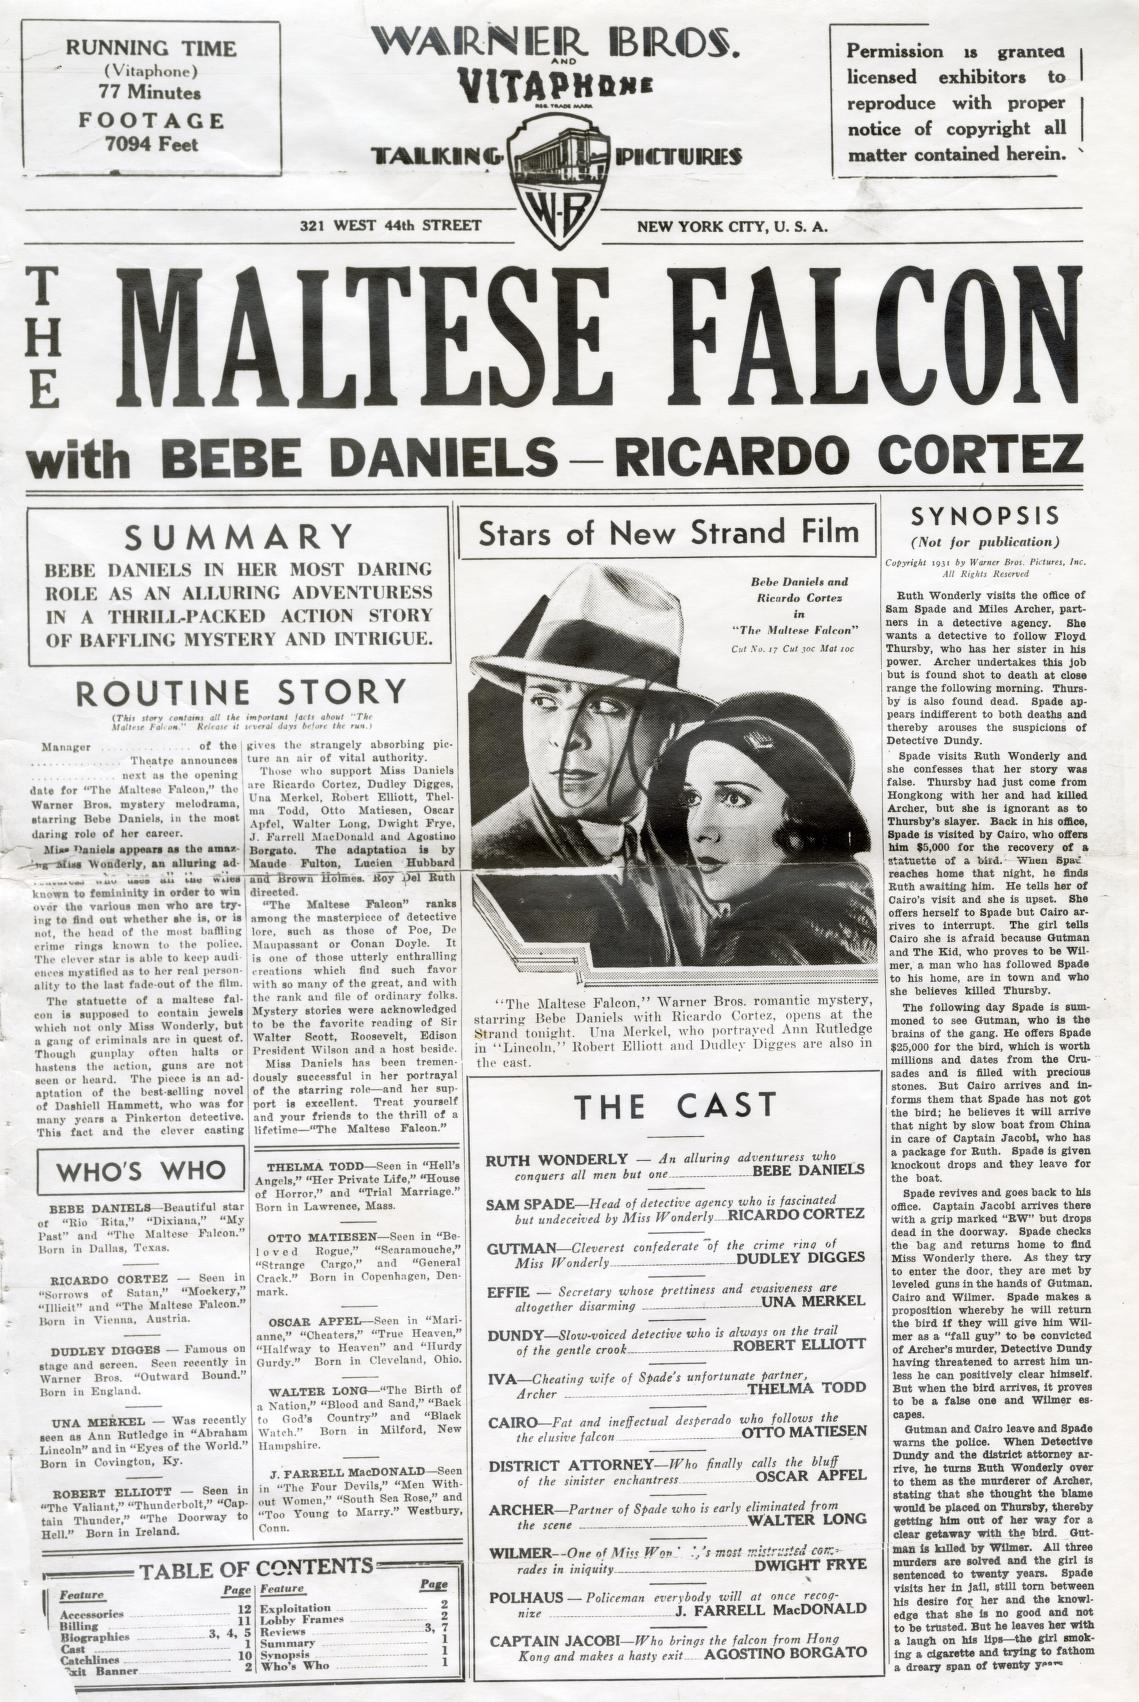 Front page of the Pressbook for the 1931 Warner Bros. film The Maltese Falcon